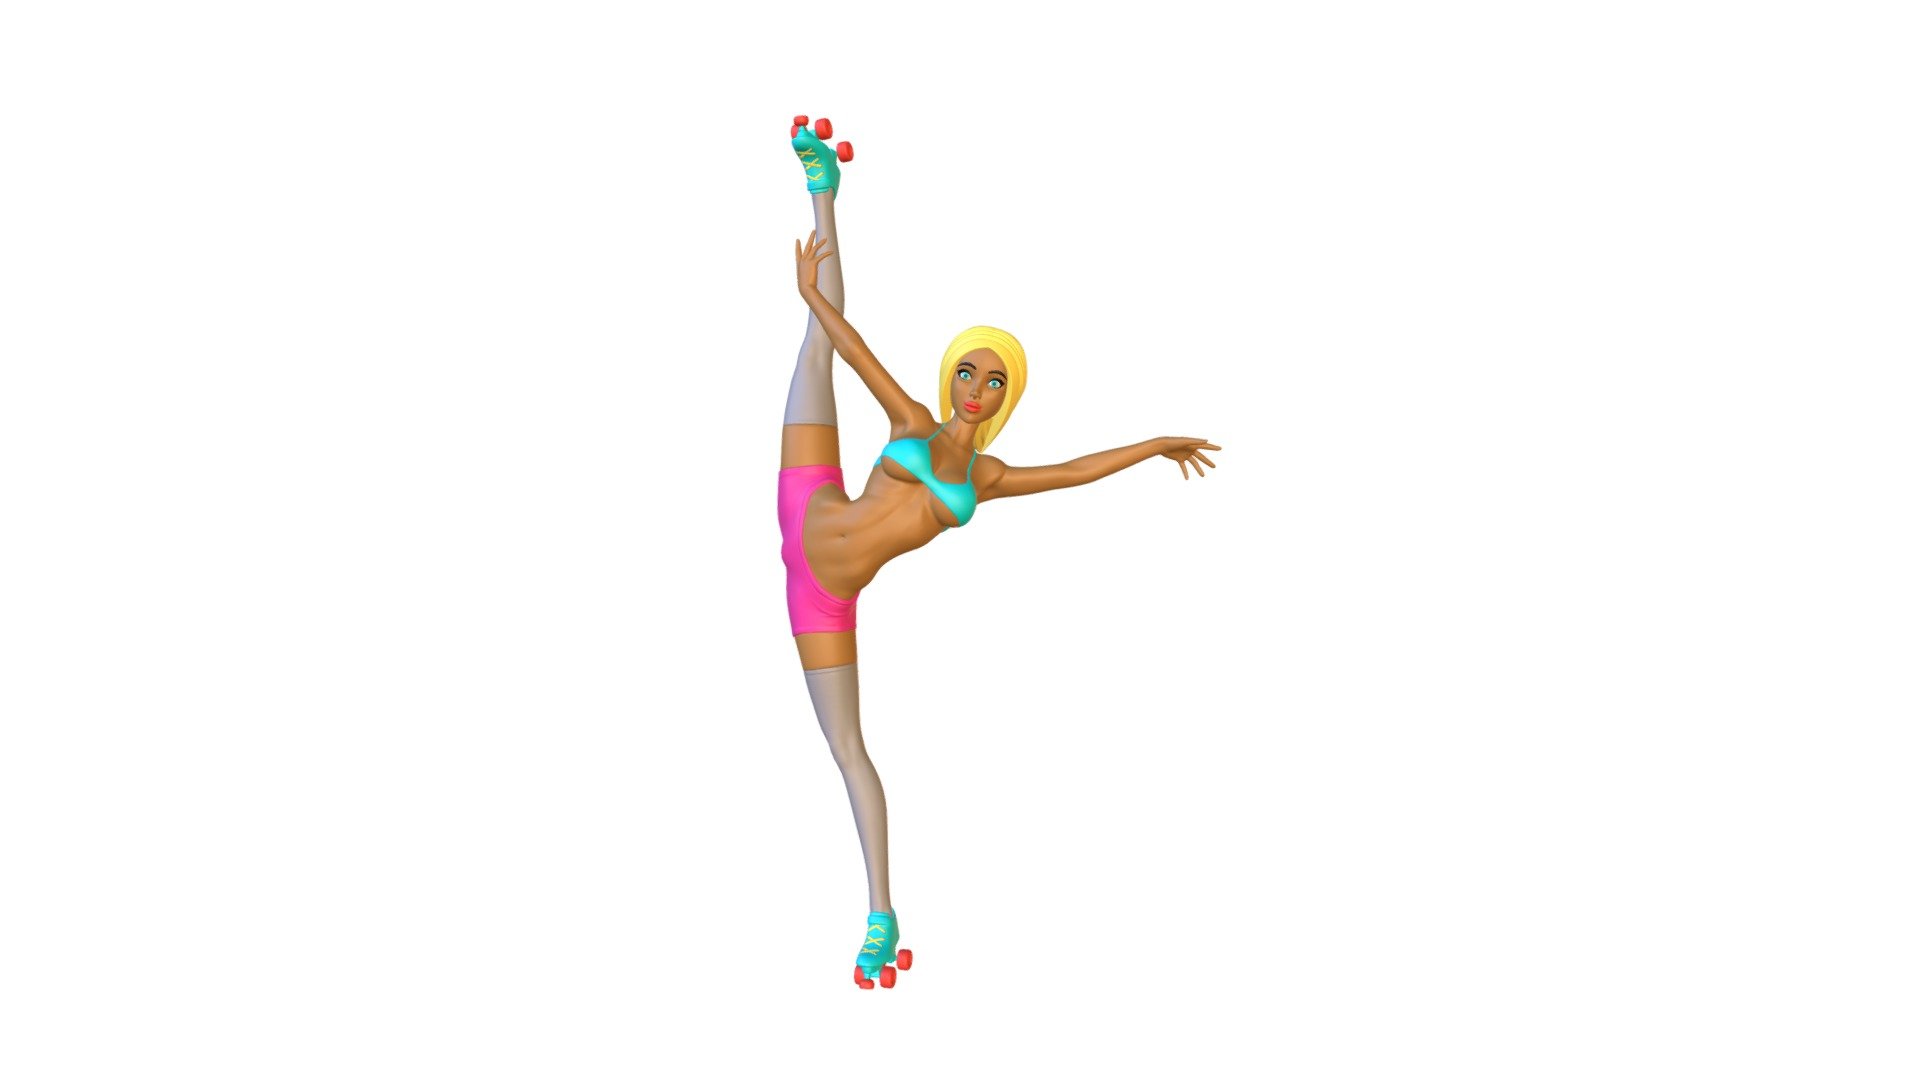 S.Kathe Flexi girl fit champion is a premium model available for your female prints collection

Find the Stl files for 3D printing at:

https://3doit.net/ - S.Kathe Flexi - 3D model by 3doit.net 3d model